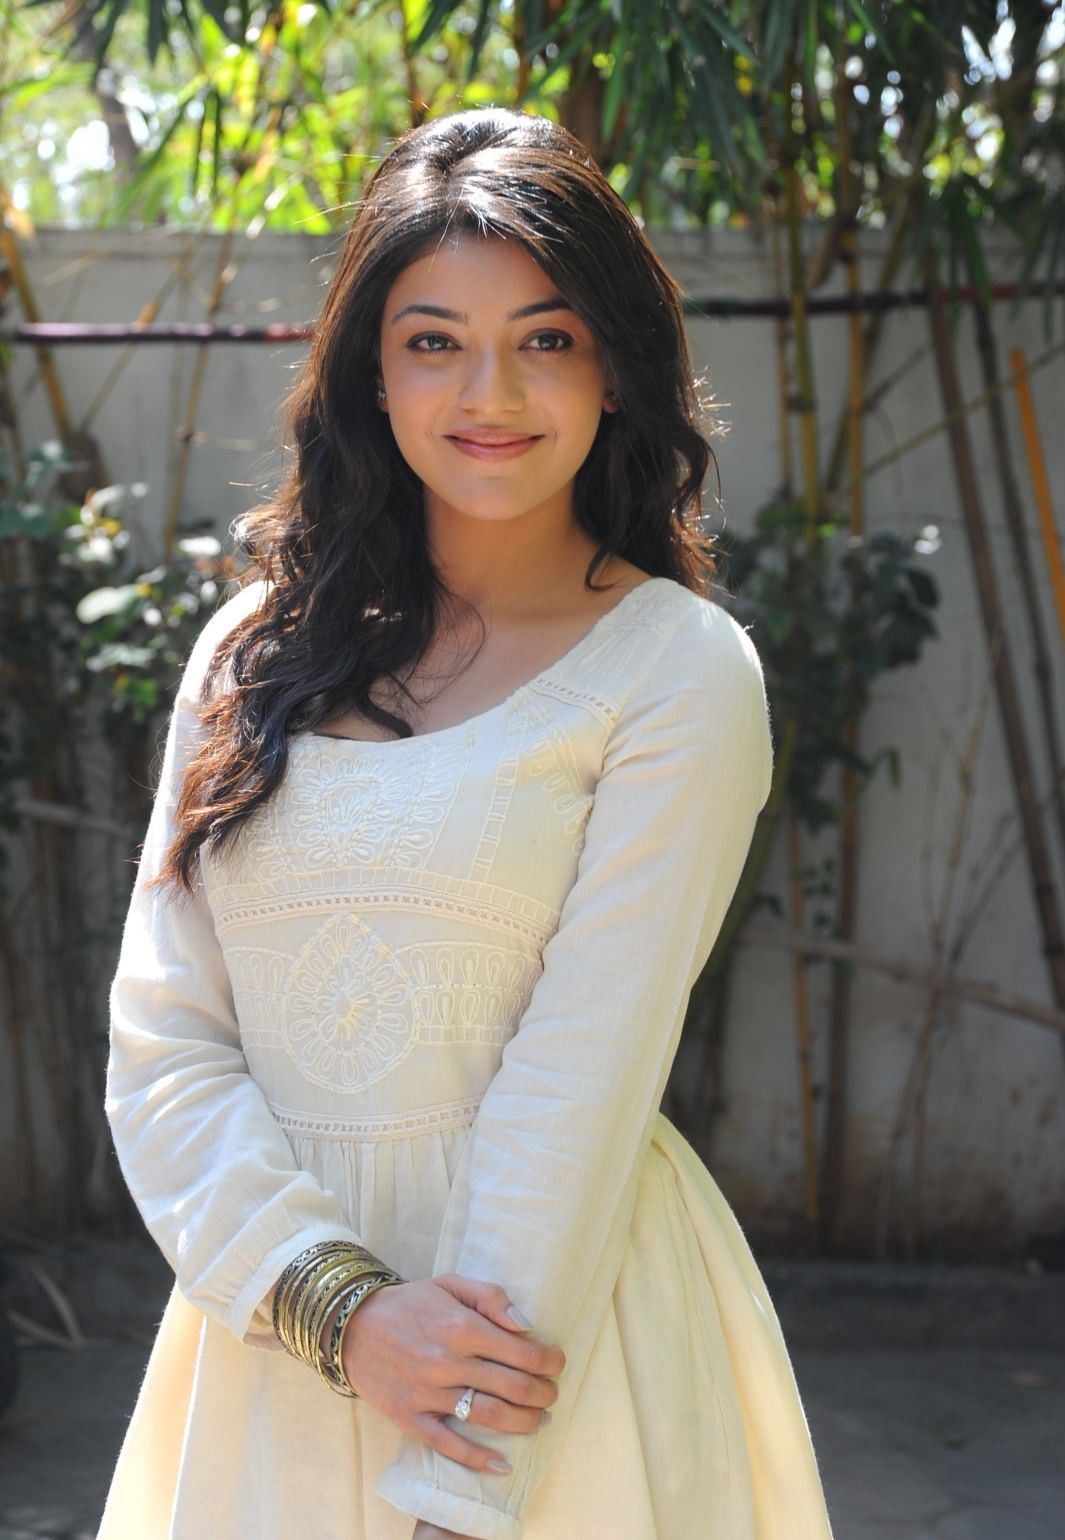 High Quality Bollywood Celebrity Pictures Kajal Agarwal Looks Beautiful And Sexy In White Dress